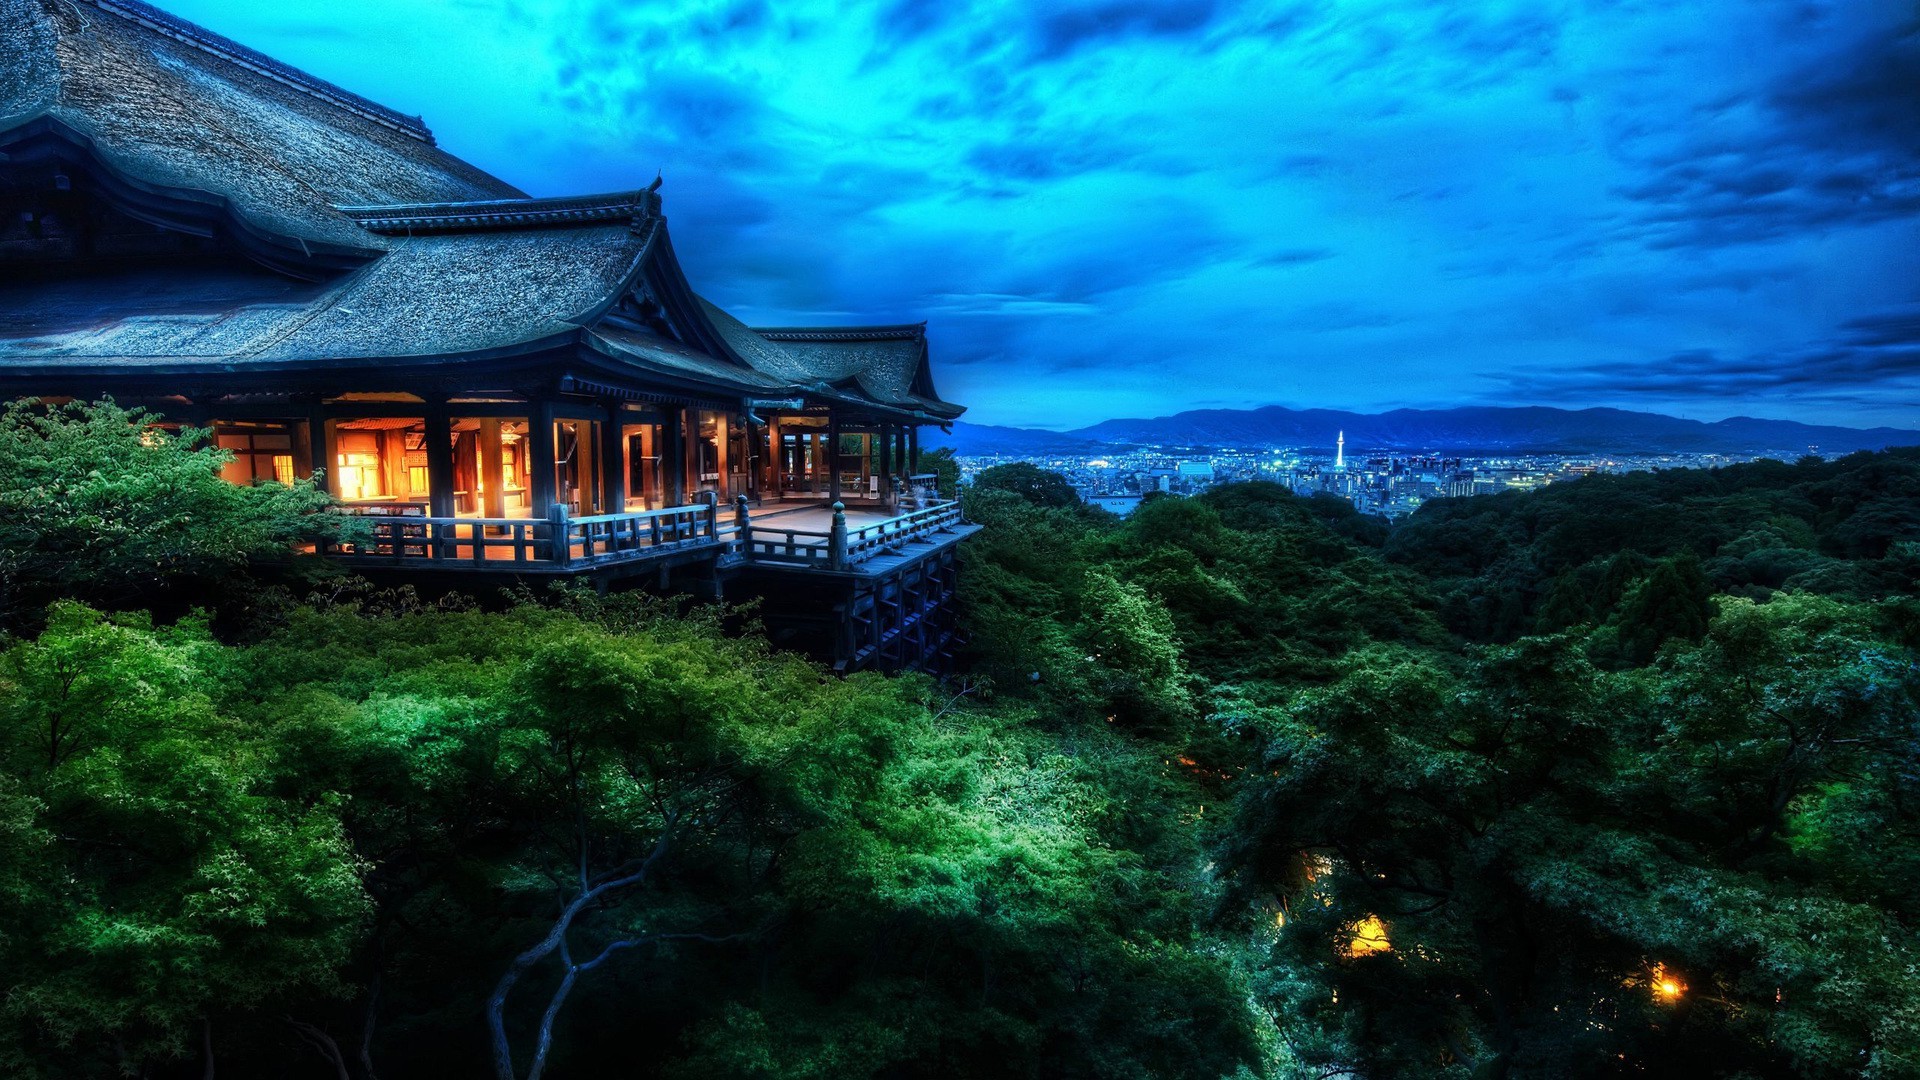 Night Forest Trees House Clouds Japan Kyoto Kiyomizudera Wallpapers Hd Desktop And Mobile Backgrounds